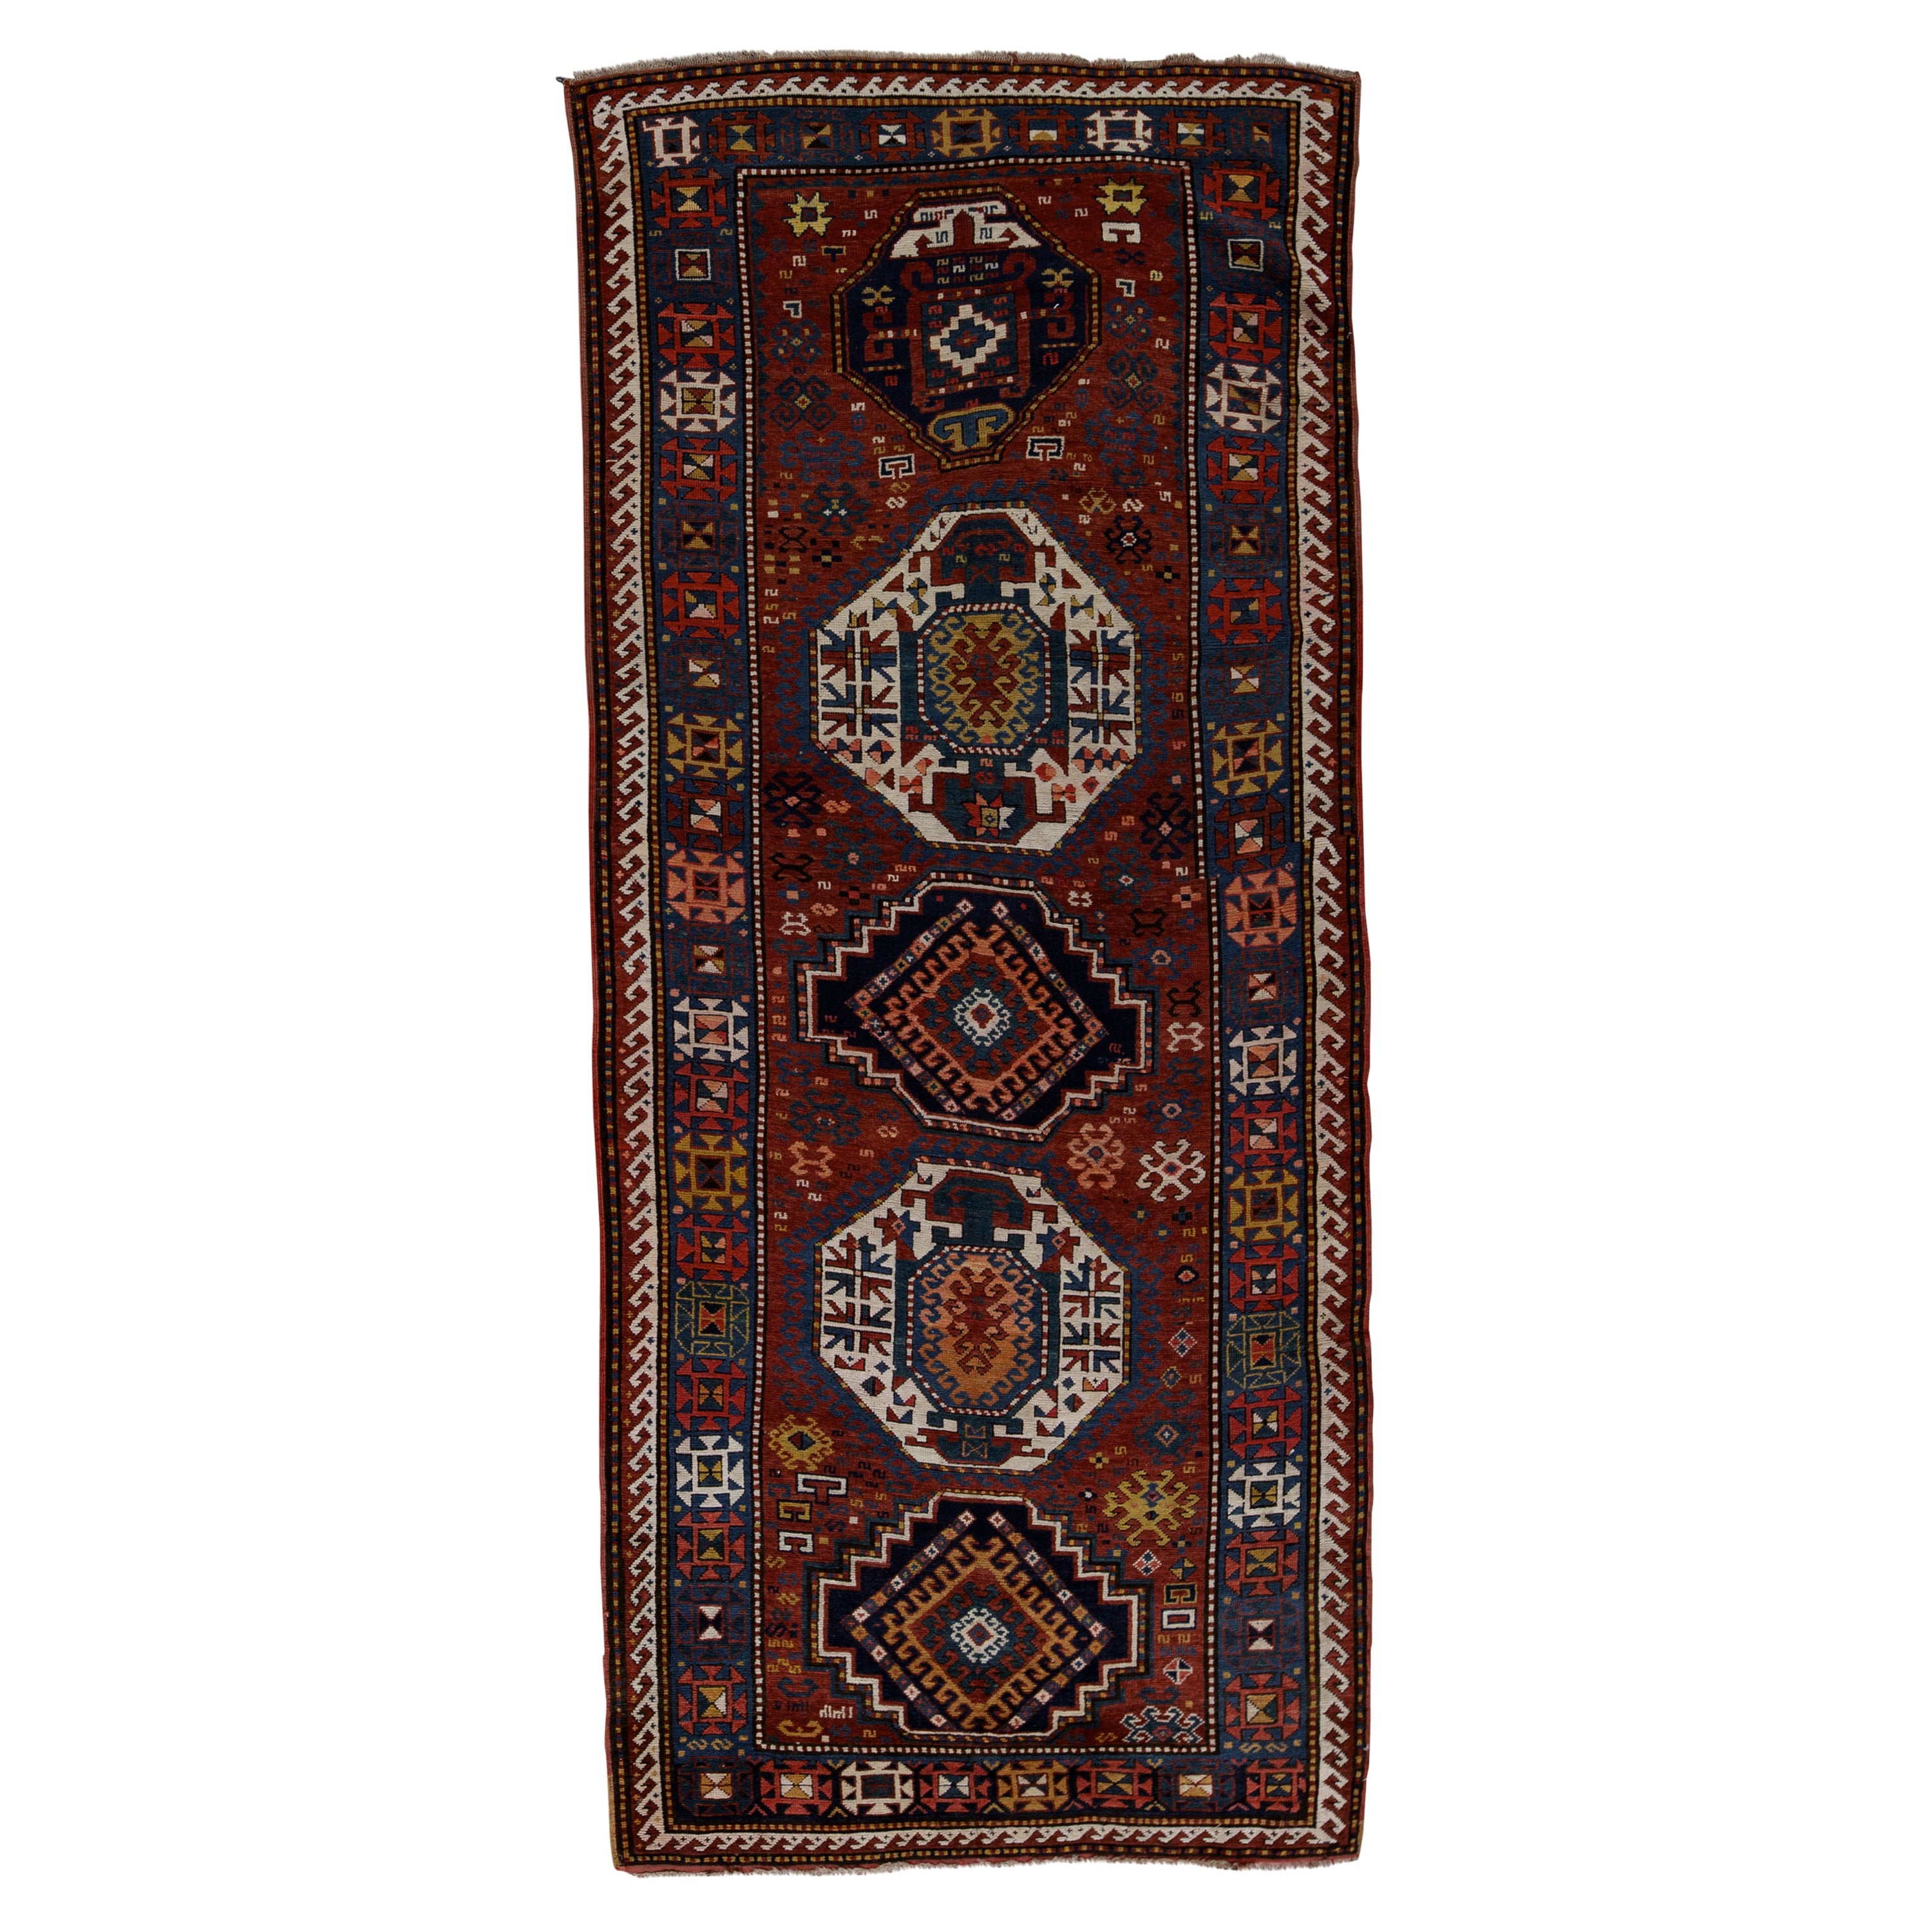 Antique Persian Fine Traditional Handwoven Luxury Wool Multi Runner